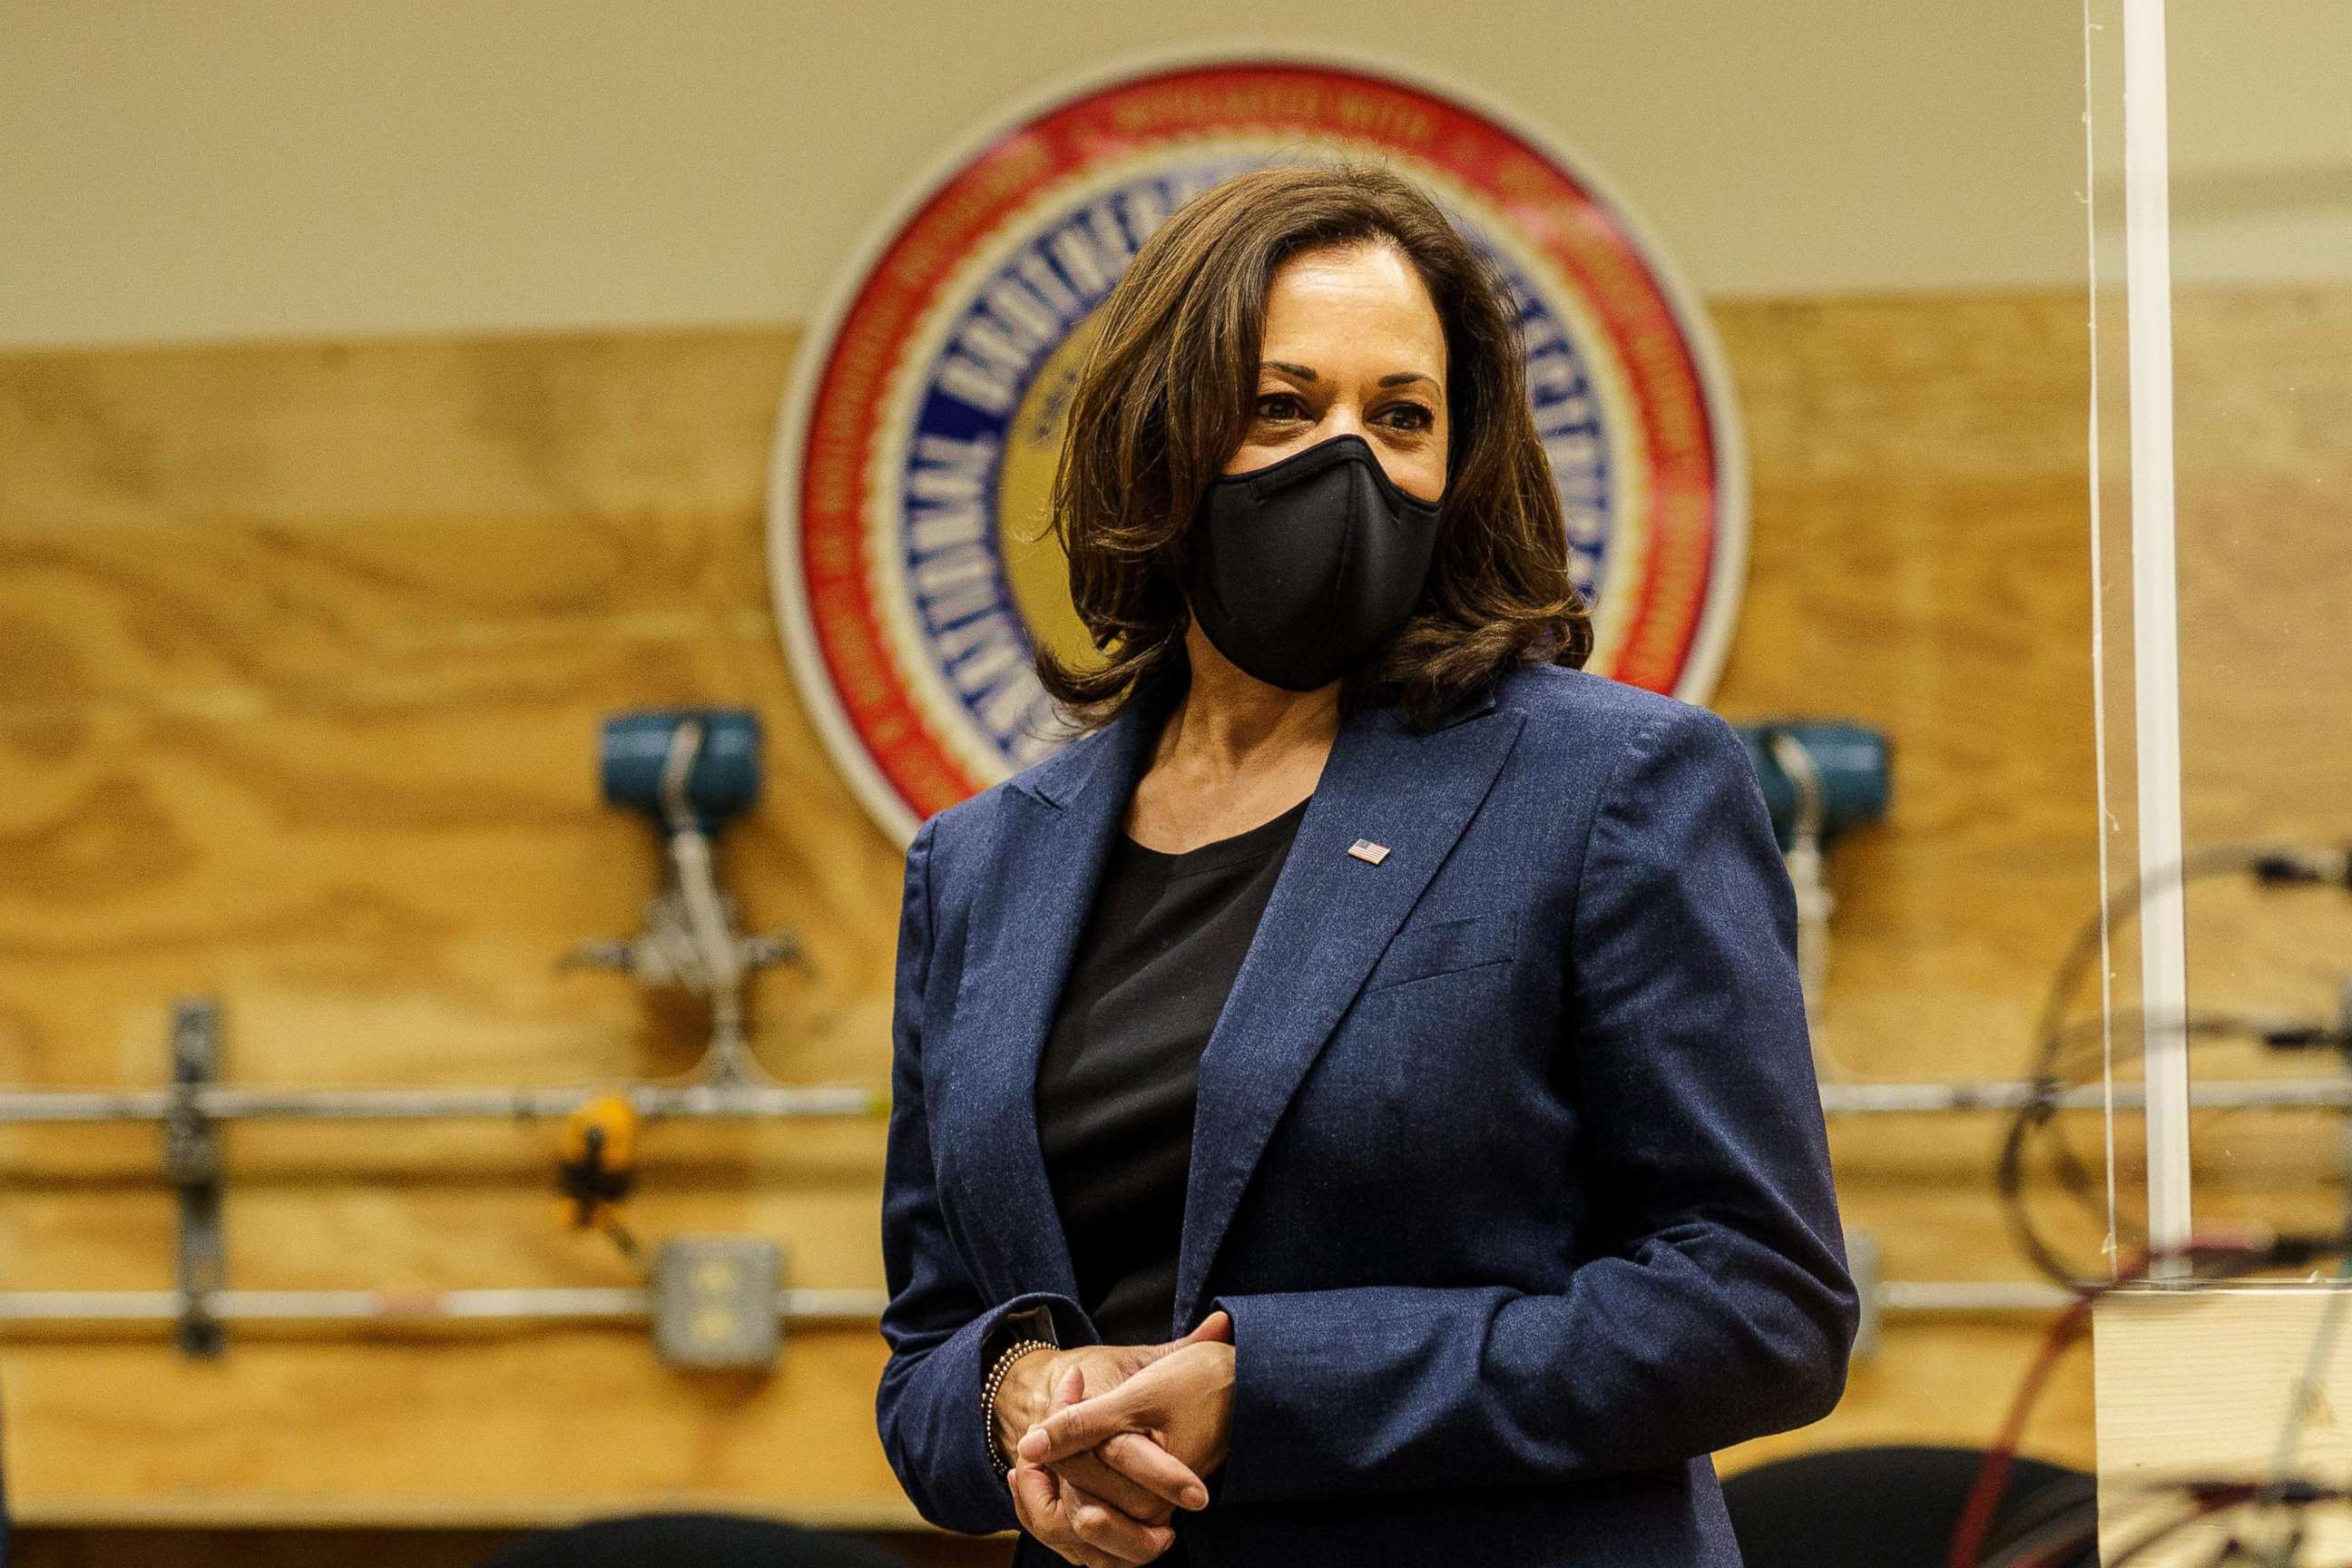 PHOTO: Democratic vice presidential nominee Kamala Harris tours an International Brotherhood of Electrical Workers (IBEW) training facility on Sept. 7, 2020, in Milwaukee, Wisc.